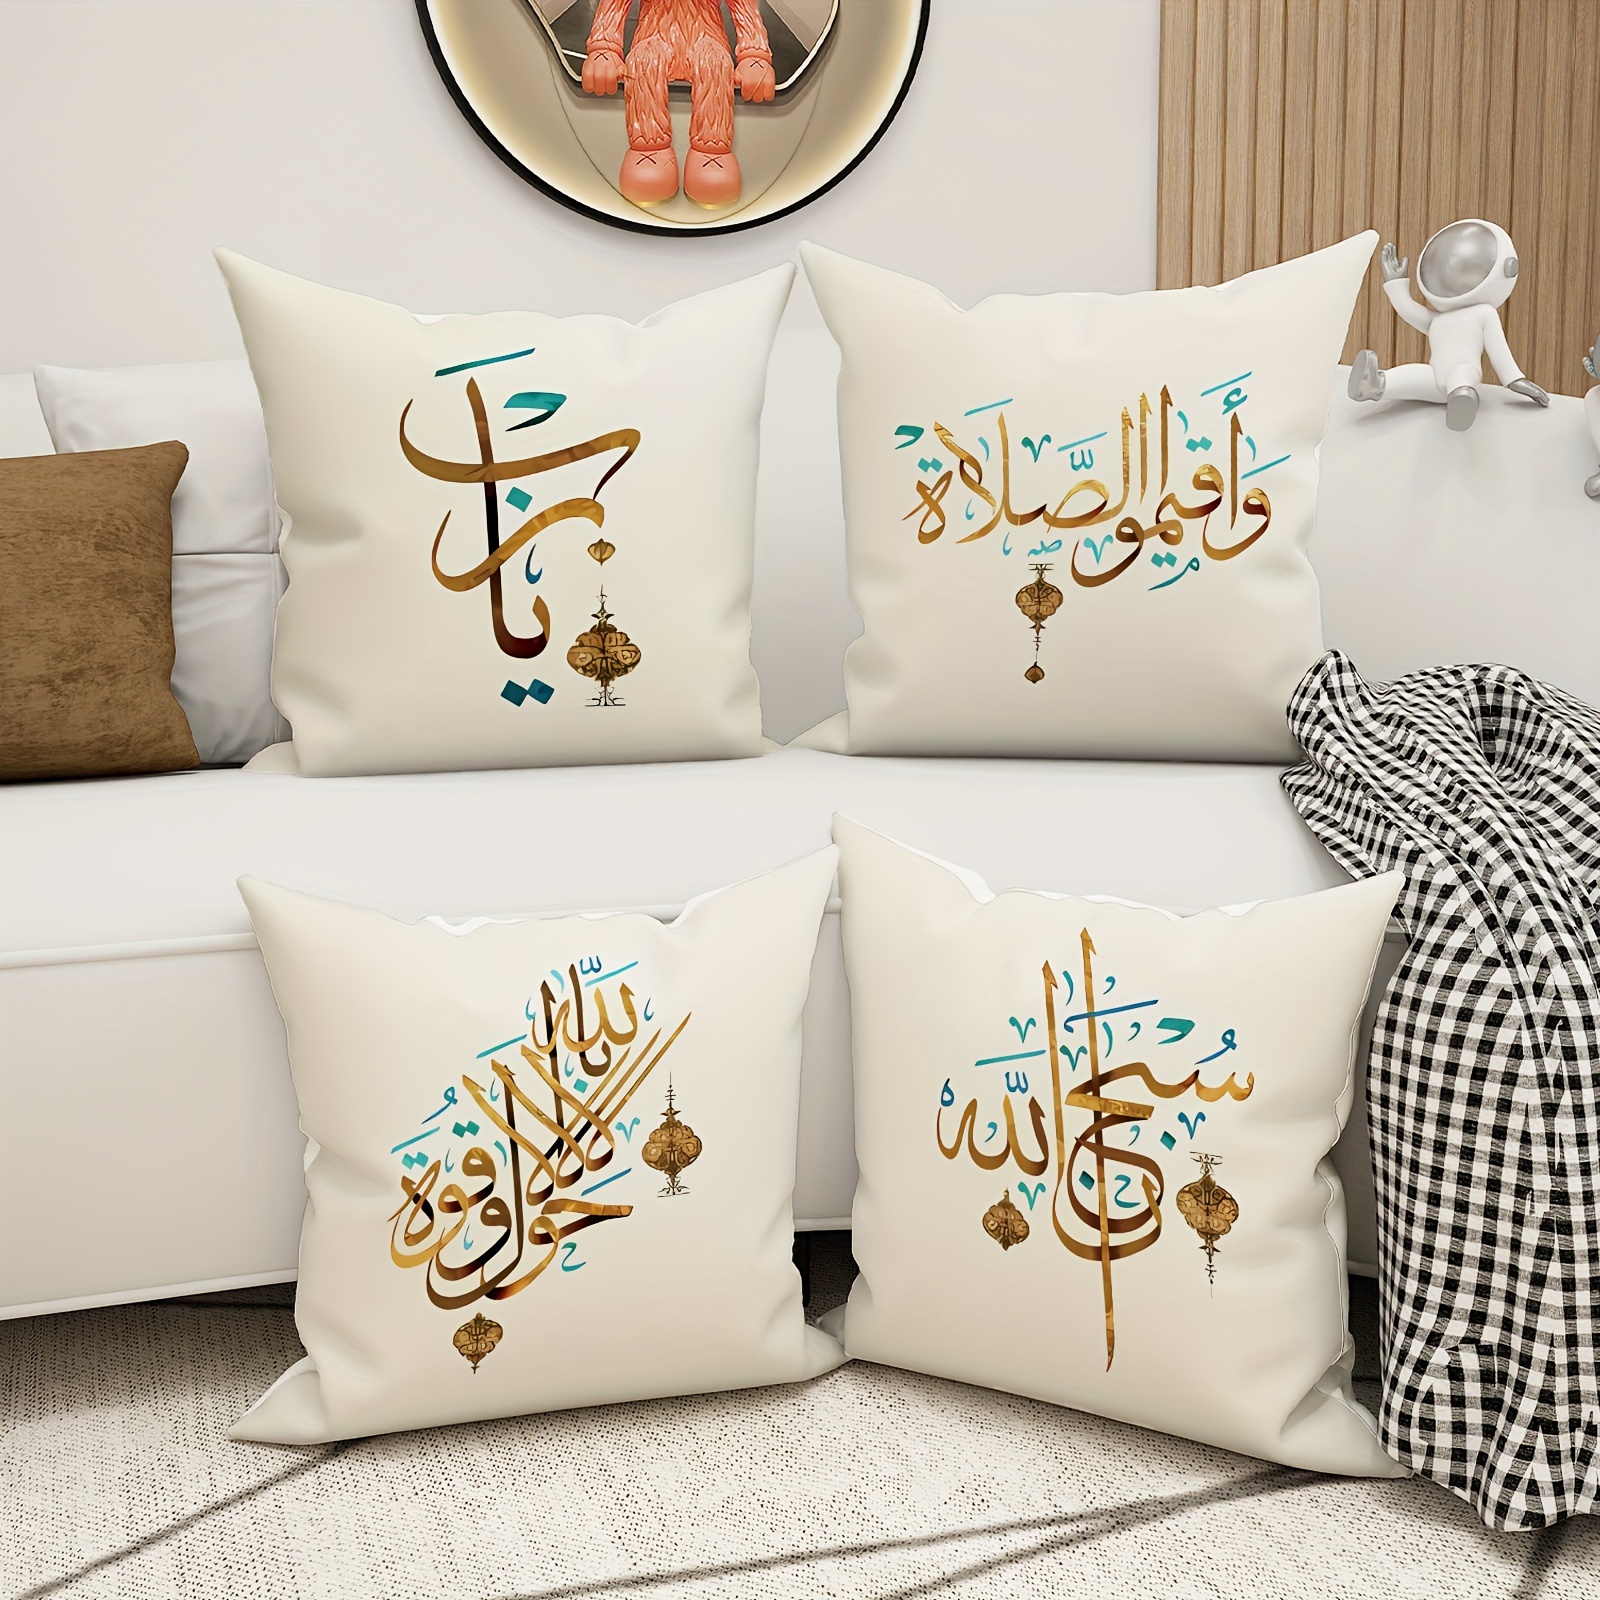 4pcs ramadan arabic calligraphy tan throw pillow covers ramadan simple throw pillow covers velvet decorative throw pillow covers 45 45cm 18 18 suitable for eid party living room bedroom sofa bed decoration gift no pillow core